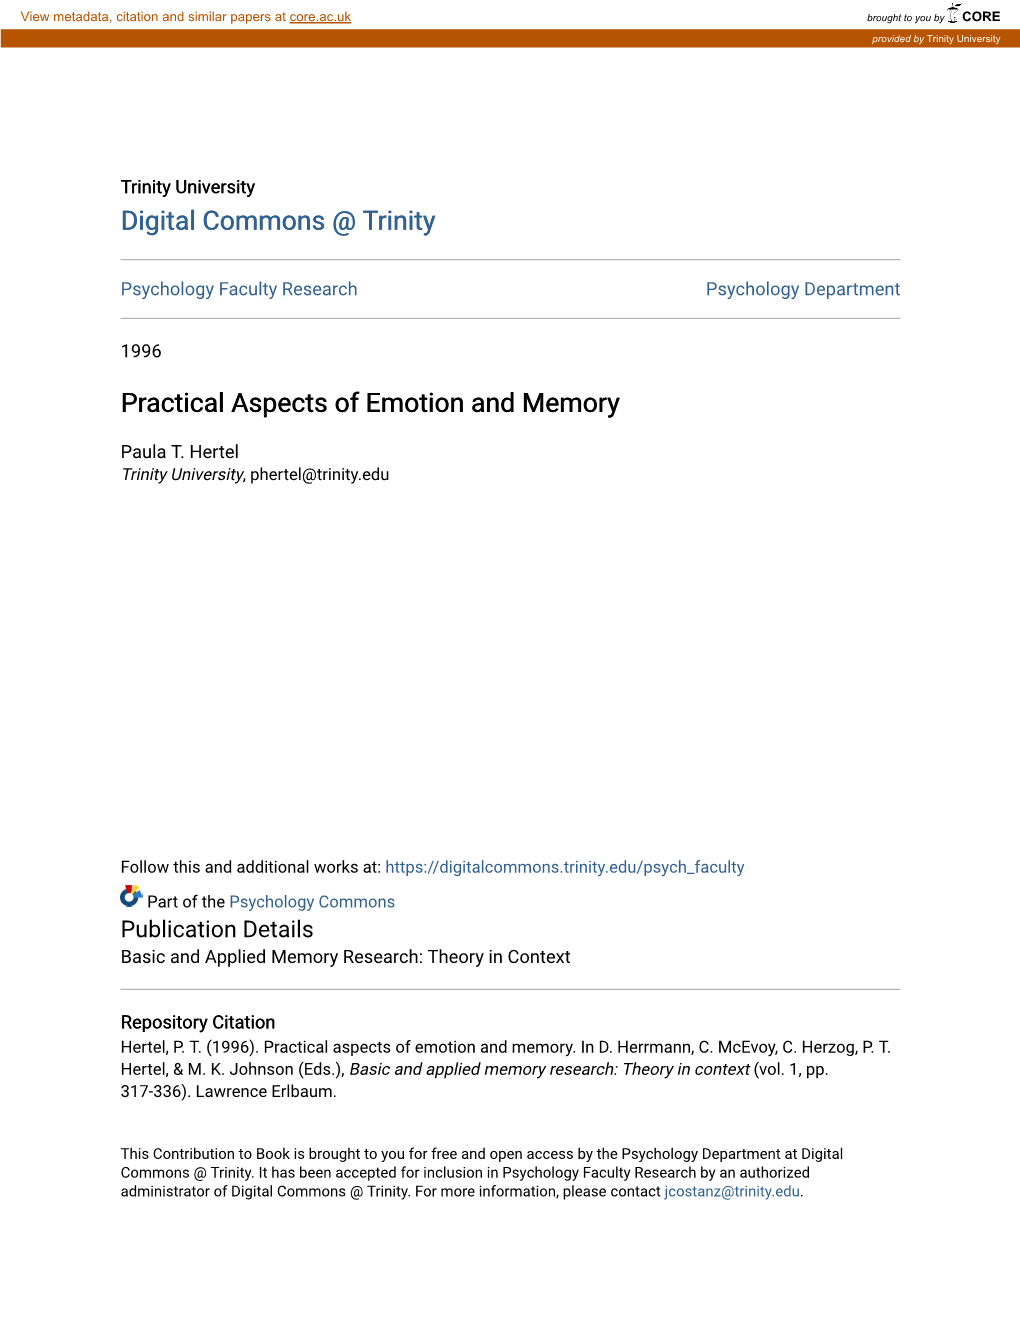 Practical Aspects of Emotion and Memory